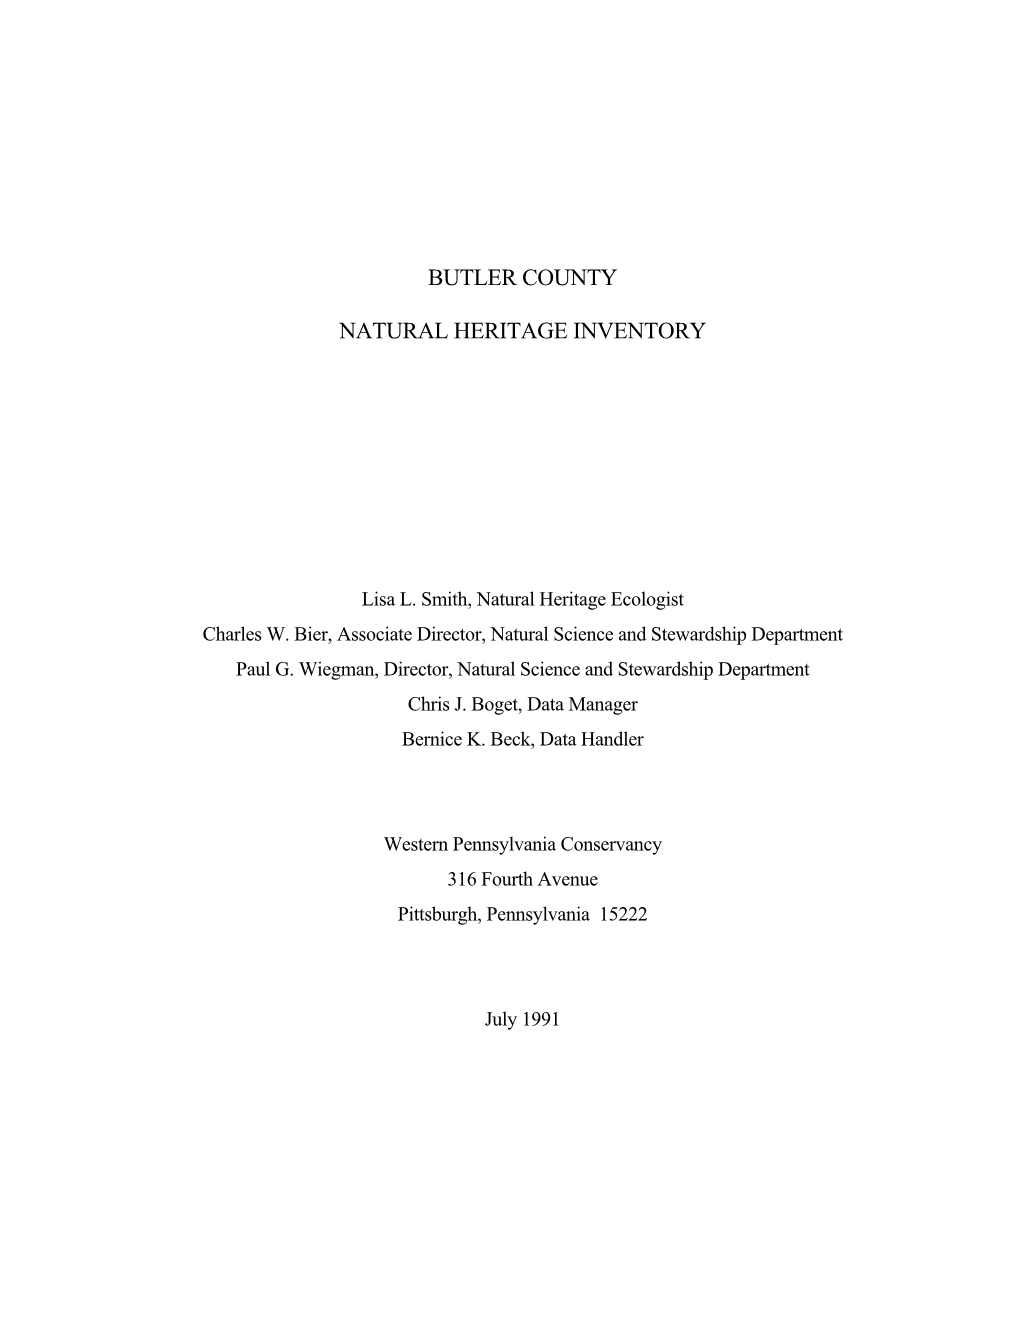 Butler County Natural Heritage Inventory, 1991